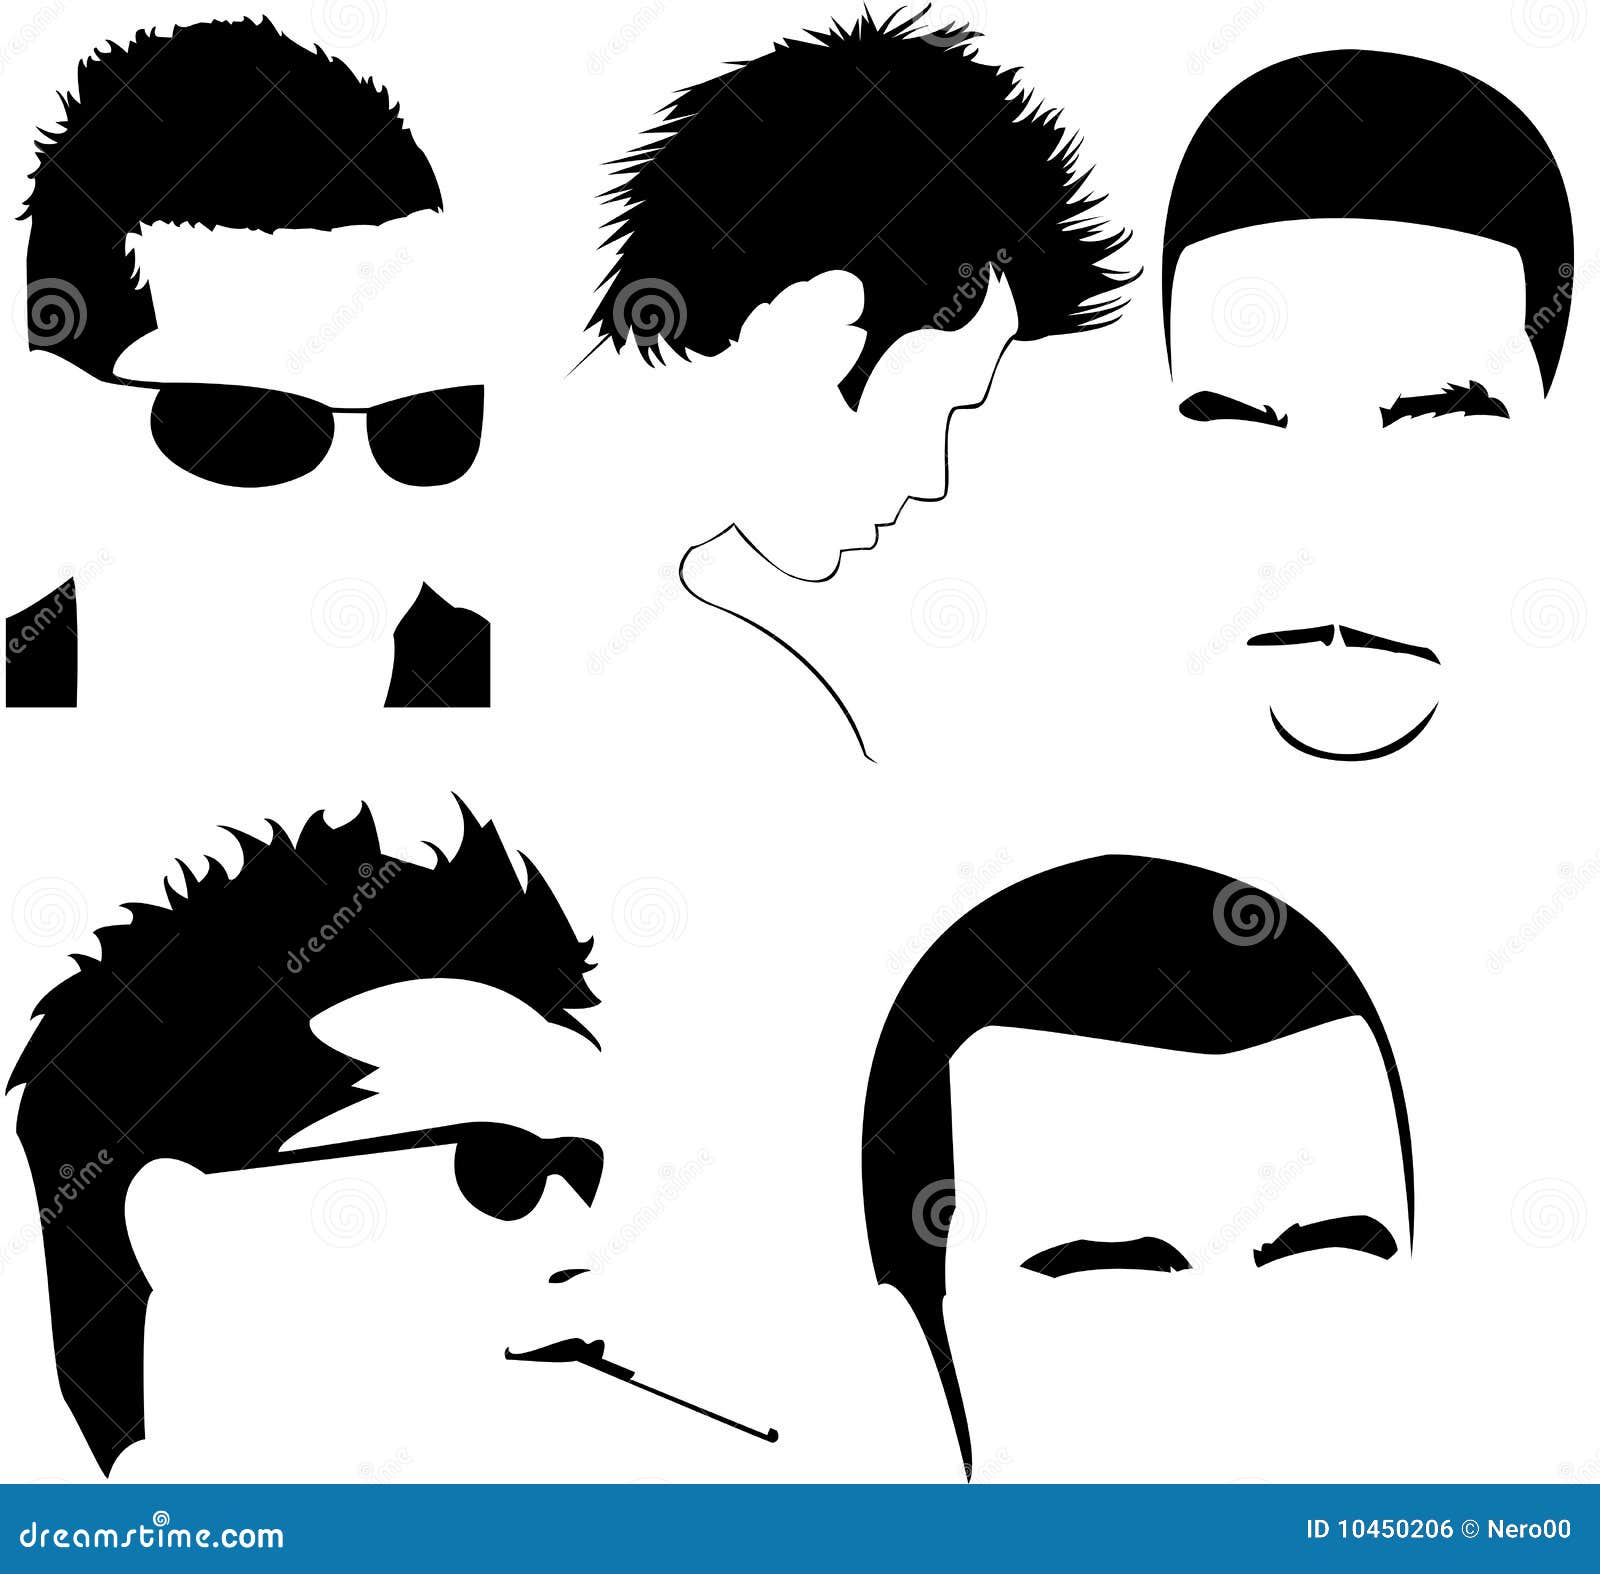 hairstyle clipart free download - photo #50